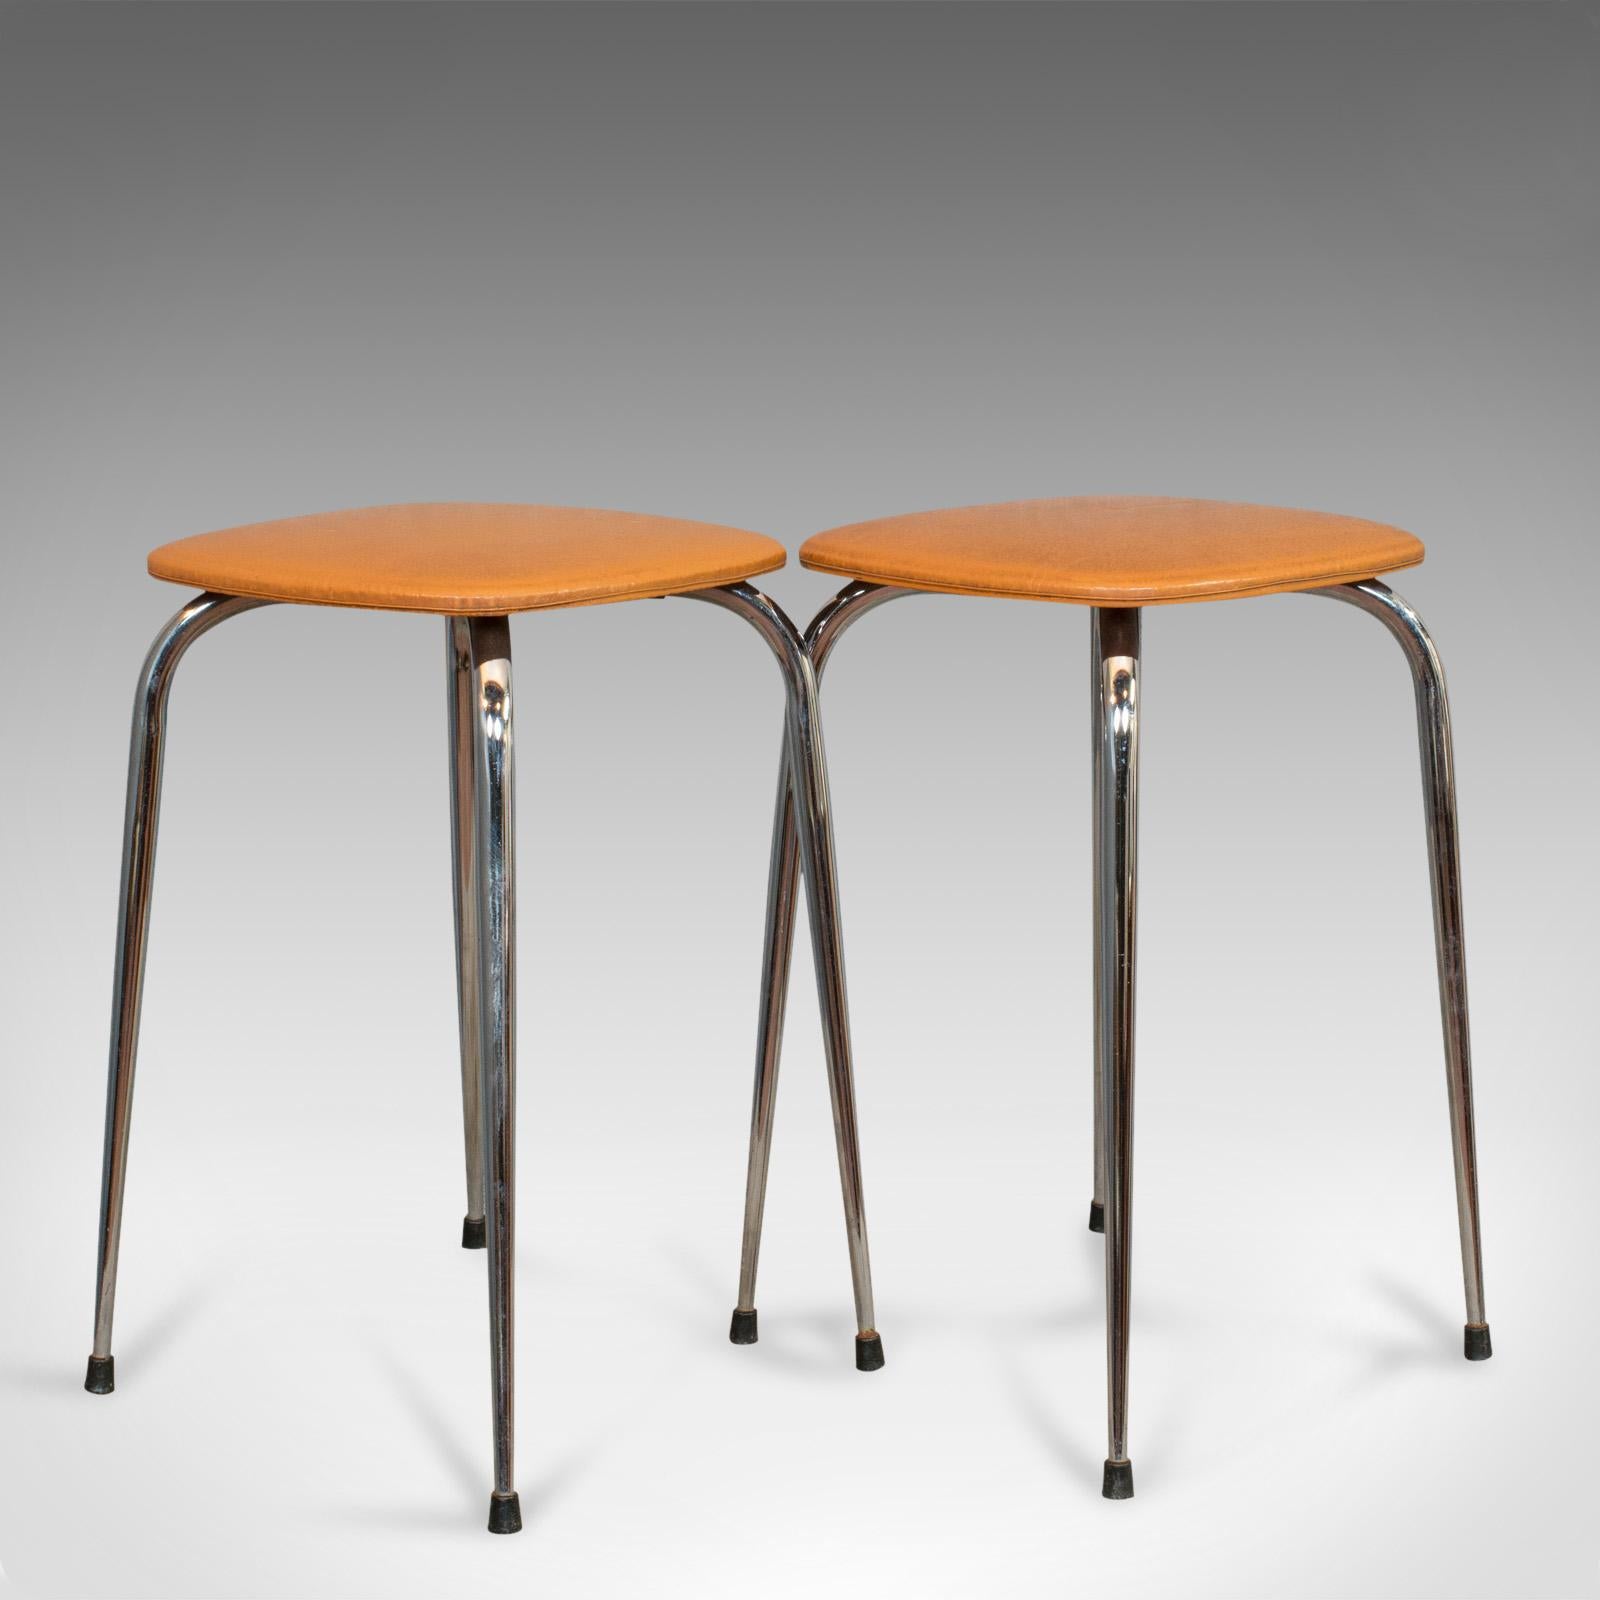 Faux Leather Pair of Vintage Lounge Stools, French, Leatherette, 1960s Stool, 20th Century For Sale